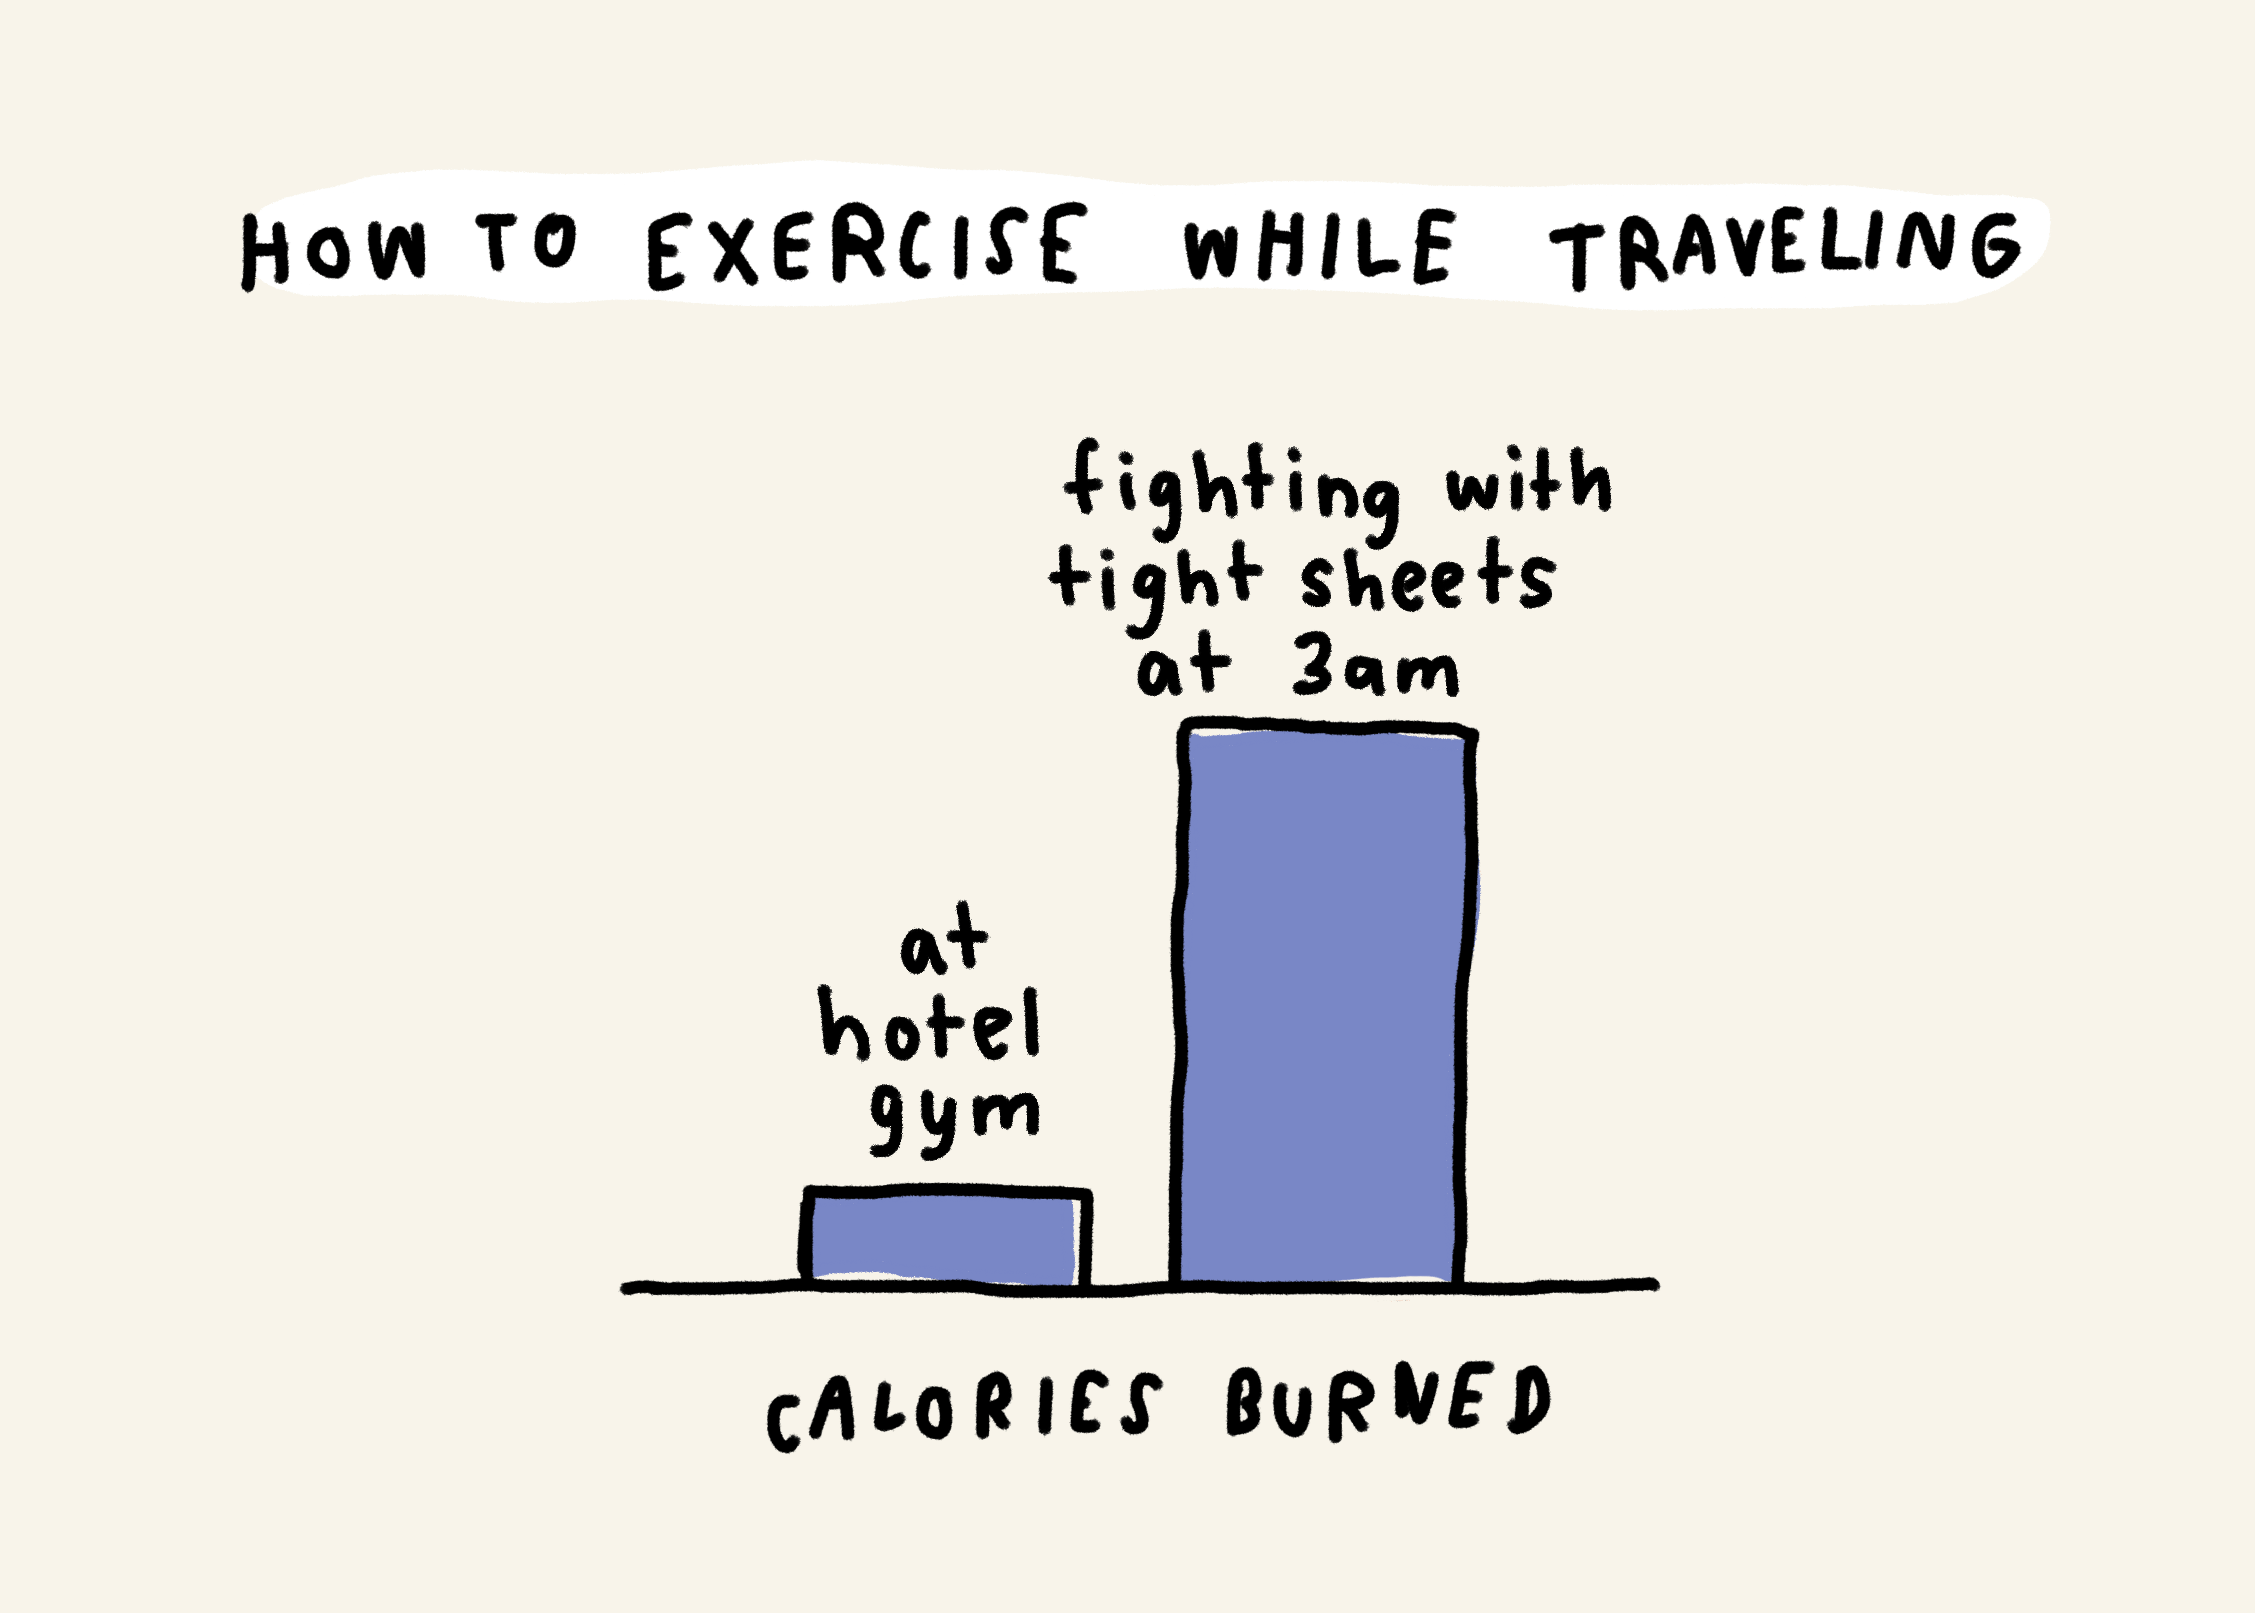 How to exercise while traveling

Calories burned at hotel gym: low
Calories burned while fighting with tight sheets at 3am: high